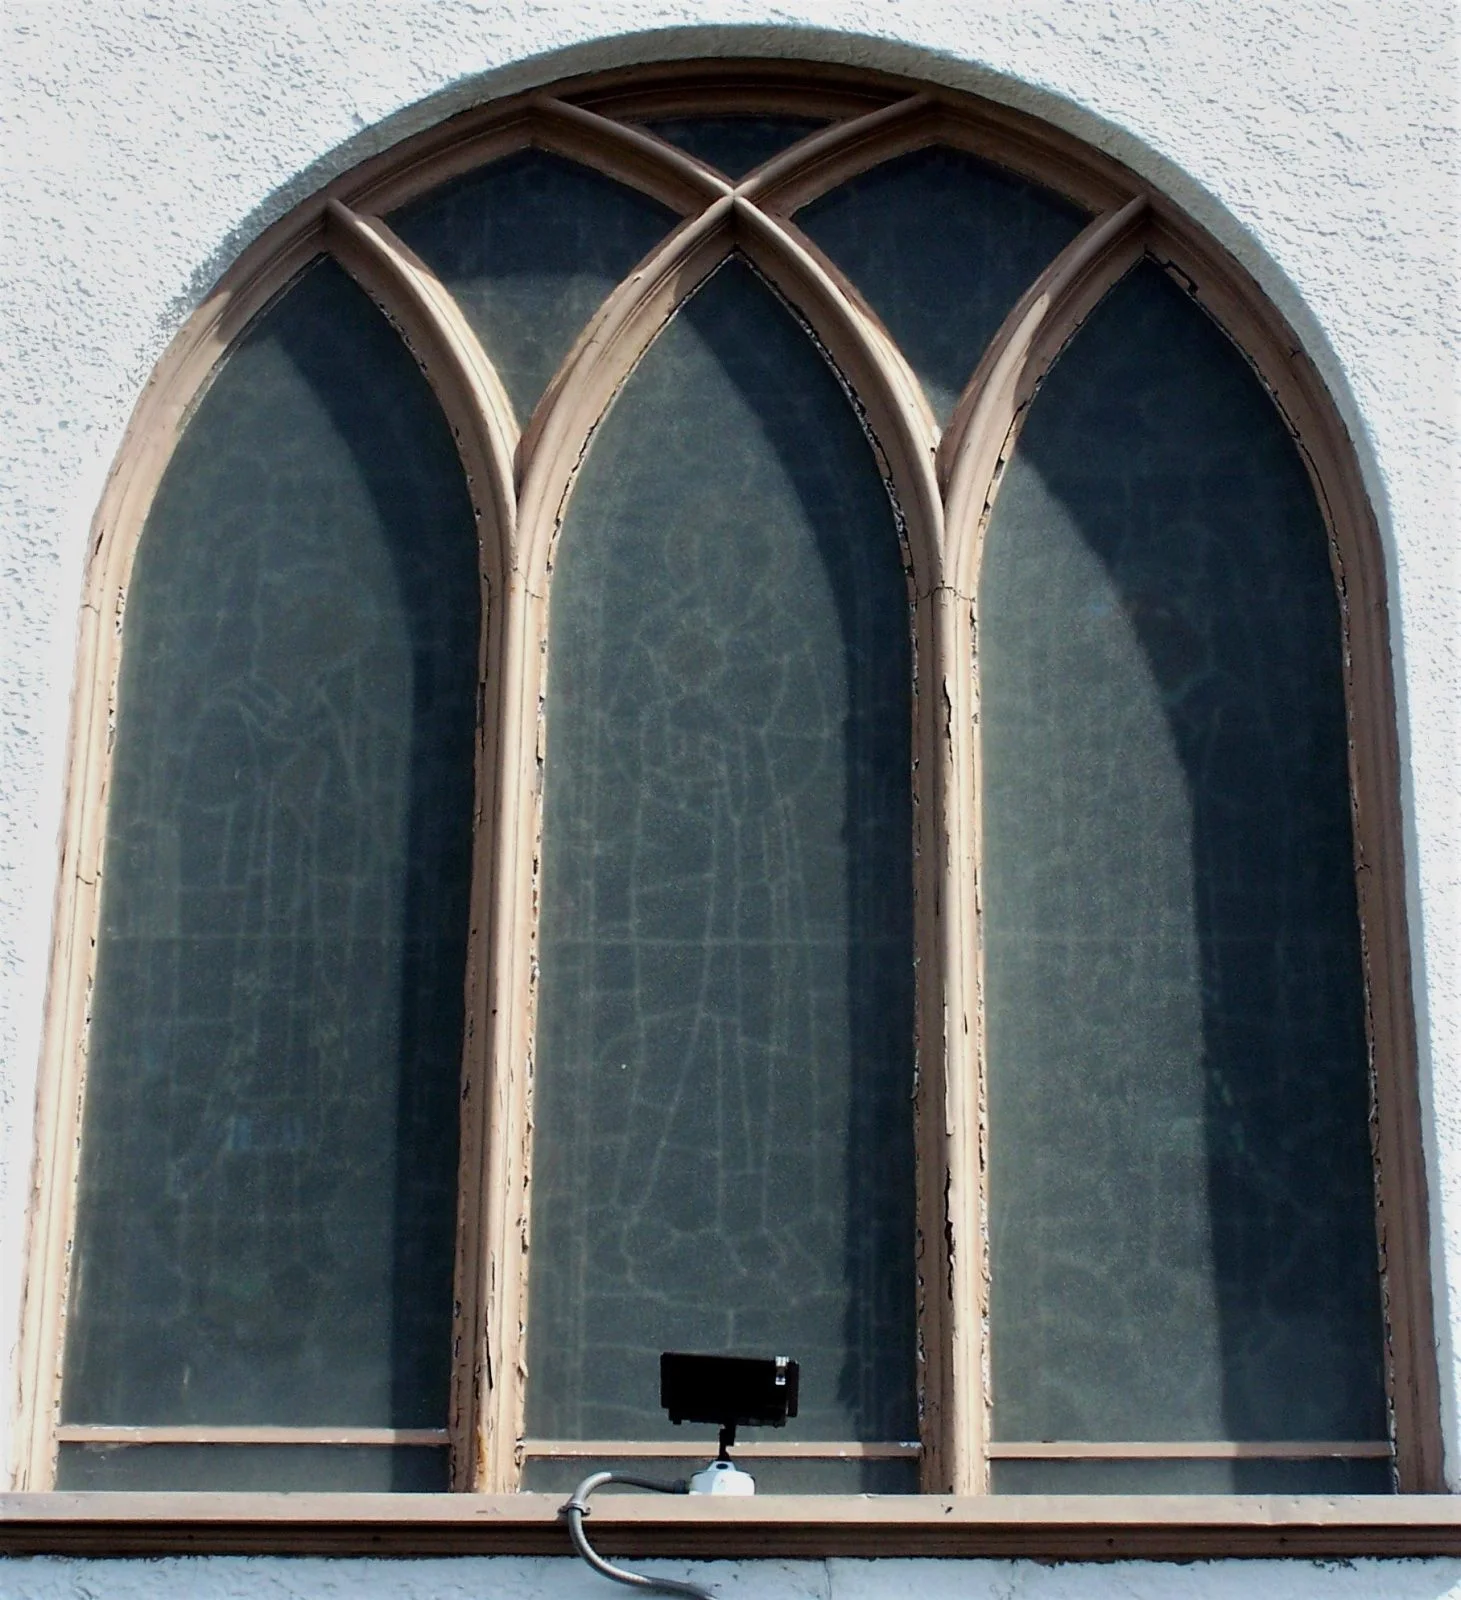 church stained glass window protective covering, stained glass window protective coverings, stained glass repair